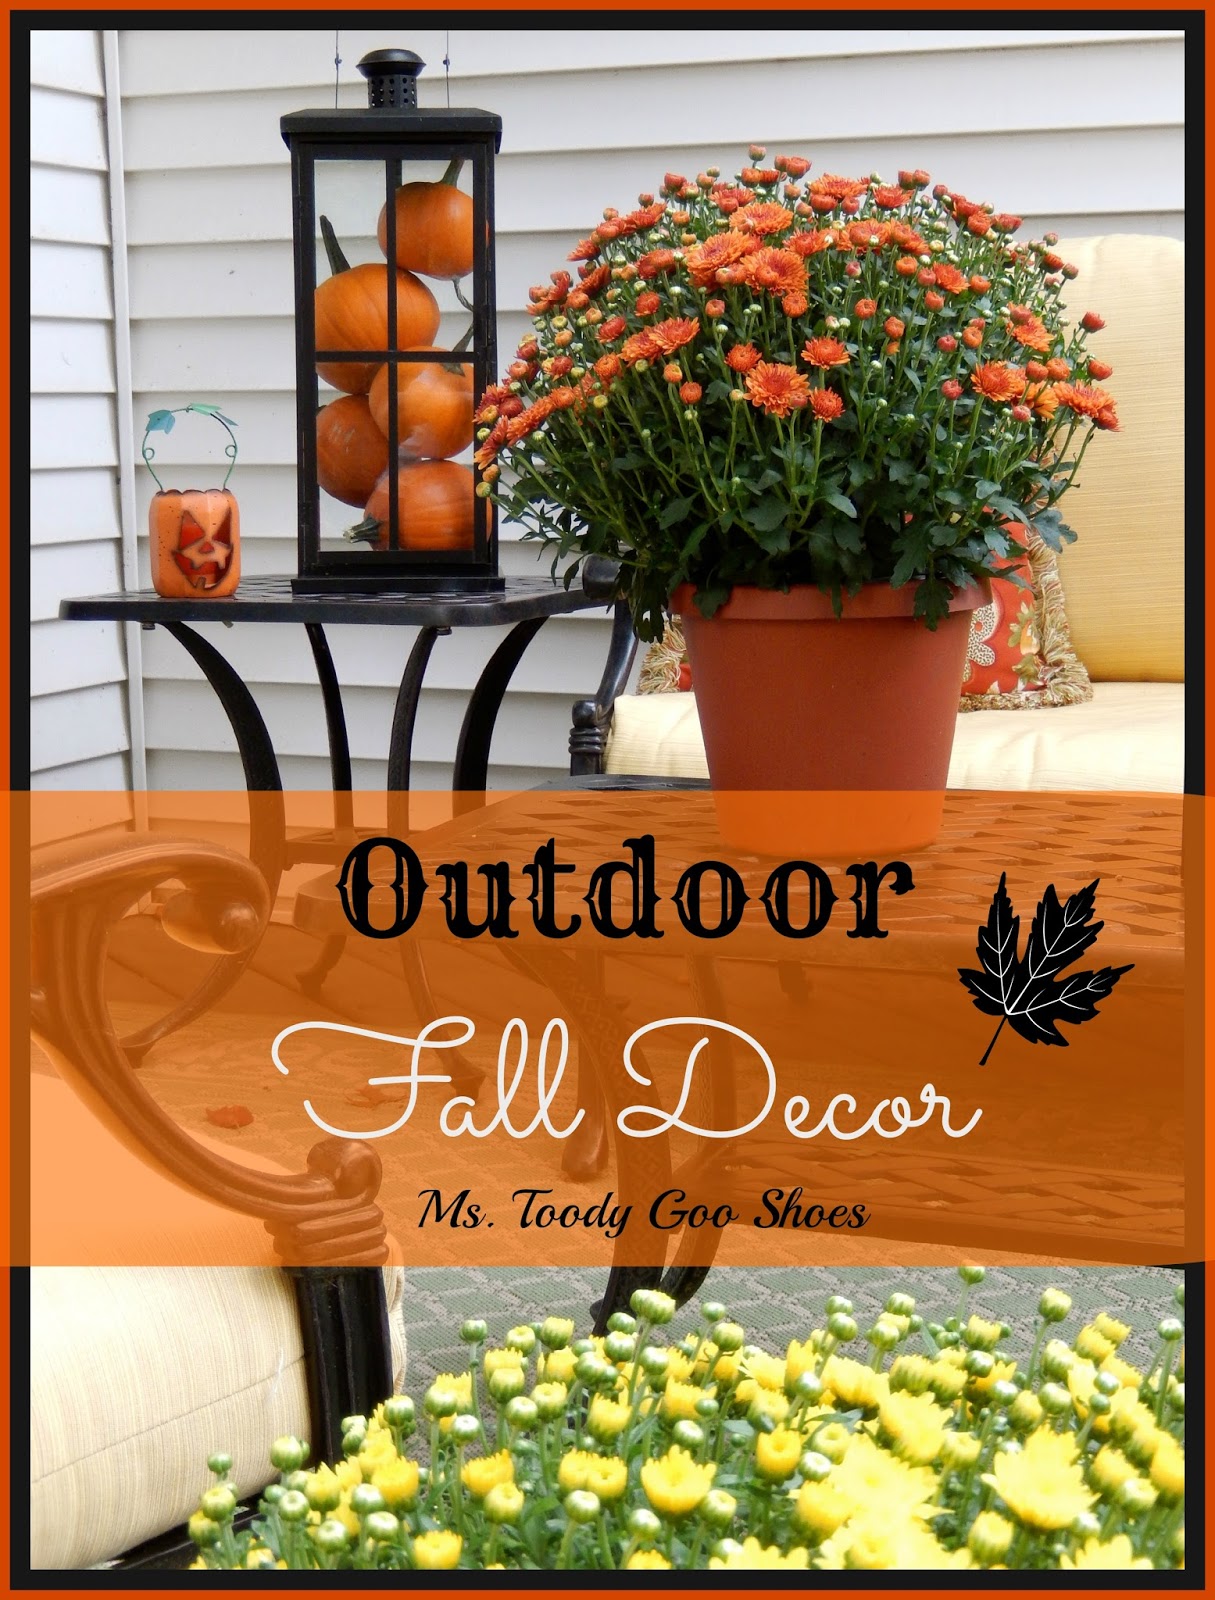  Outdoor Fall Decor by Ms. Toody Goo Shoes